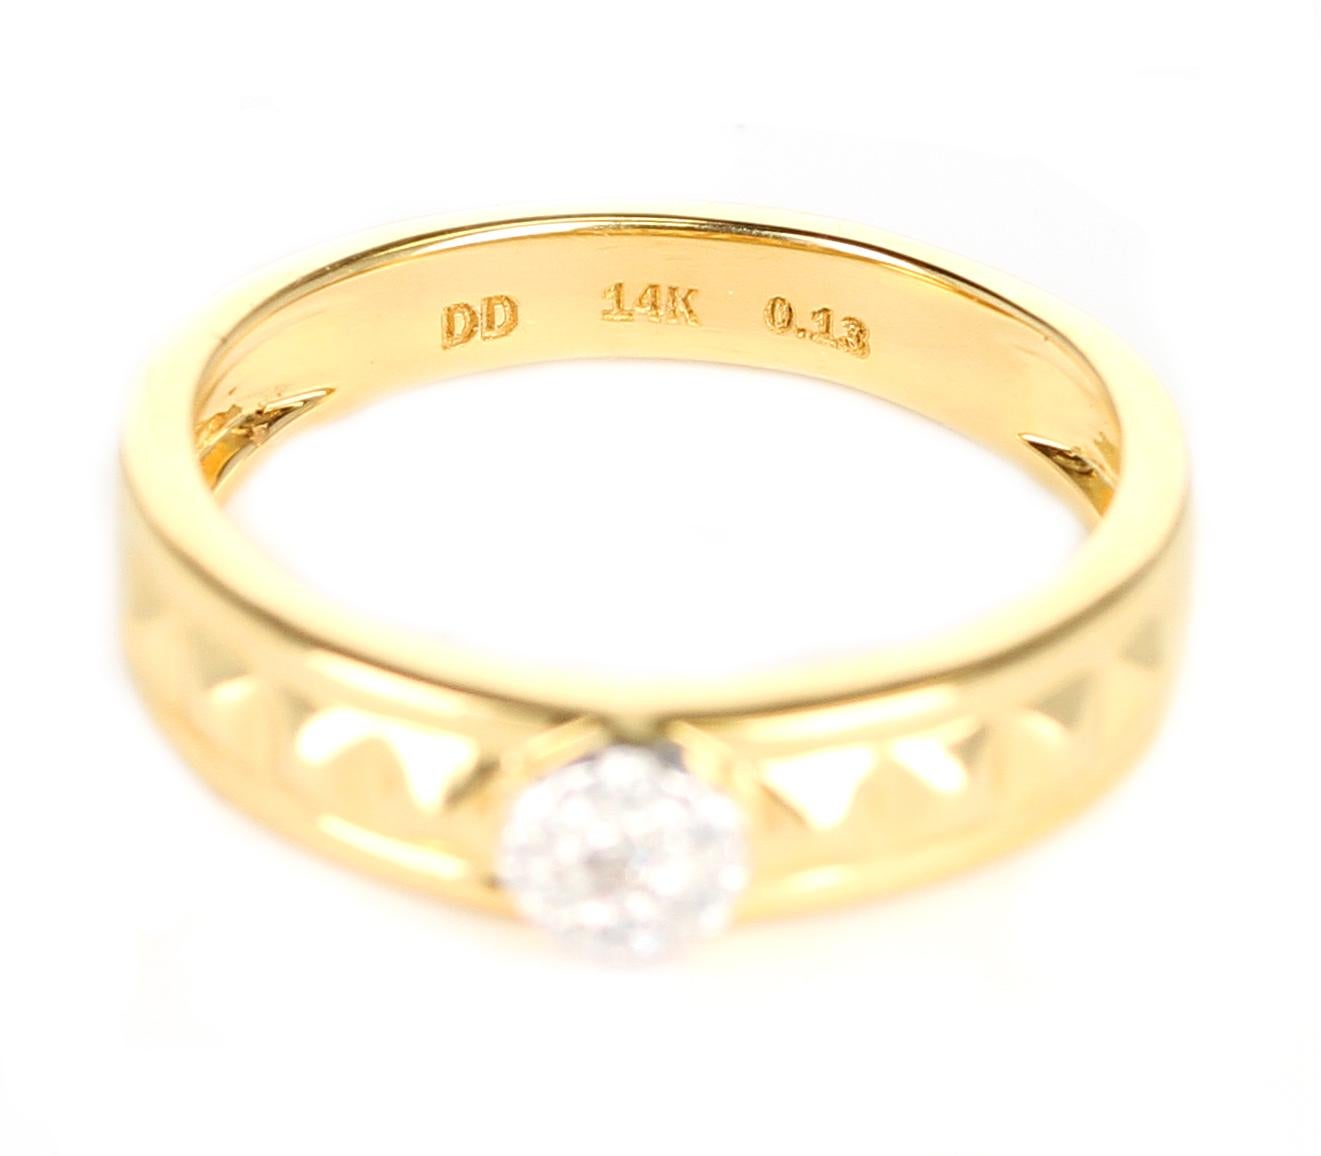 A trendy, simple, and unique 14K Yellow Gold Ring with elevated pyramid designs with 0.13 carats of Diamonds, Ring Size: 6. Signed D'D for D'Deco Jewels. Metal type and stones can be customized. 